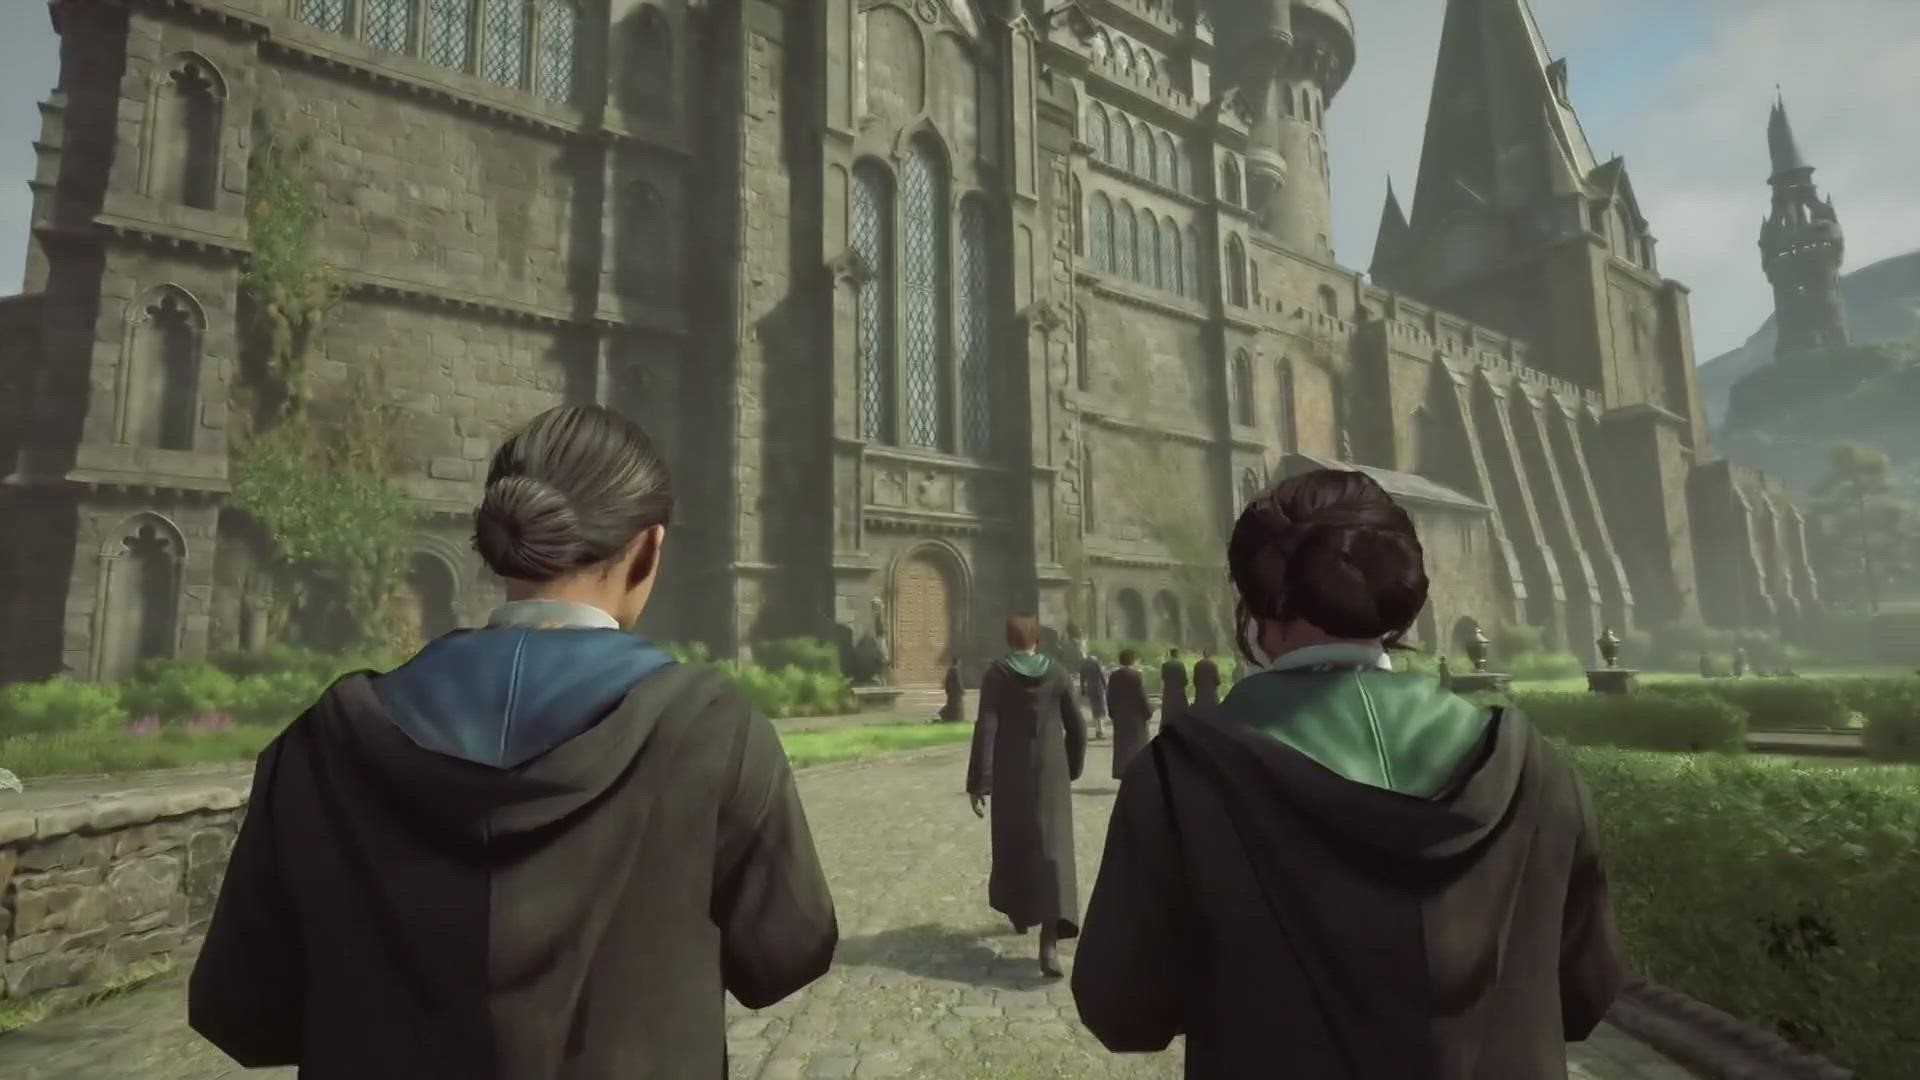 The much-anticipated videogame "Hogwarts Legacy" will feature the first transgender character in the Harry Potter franchise.